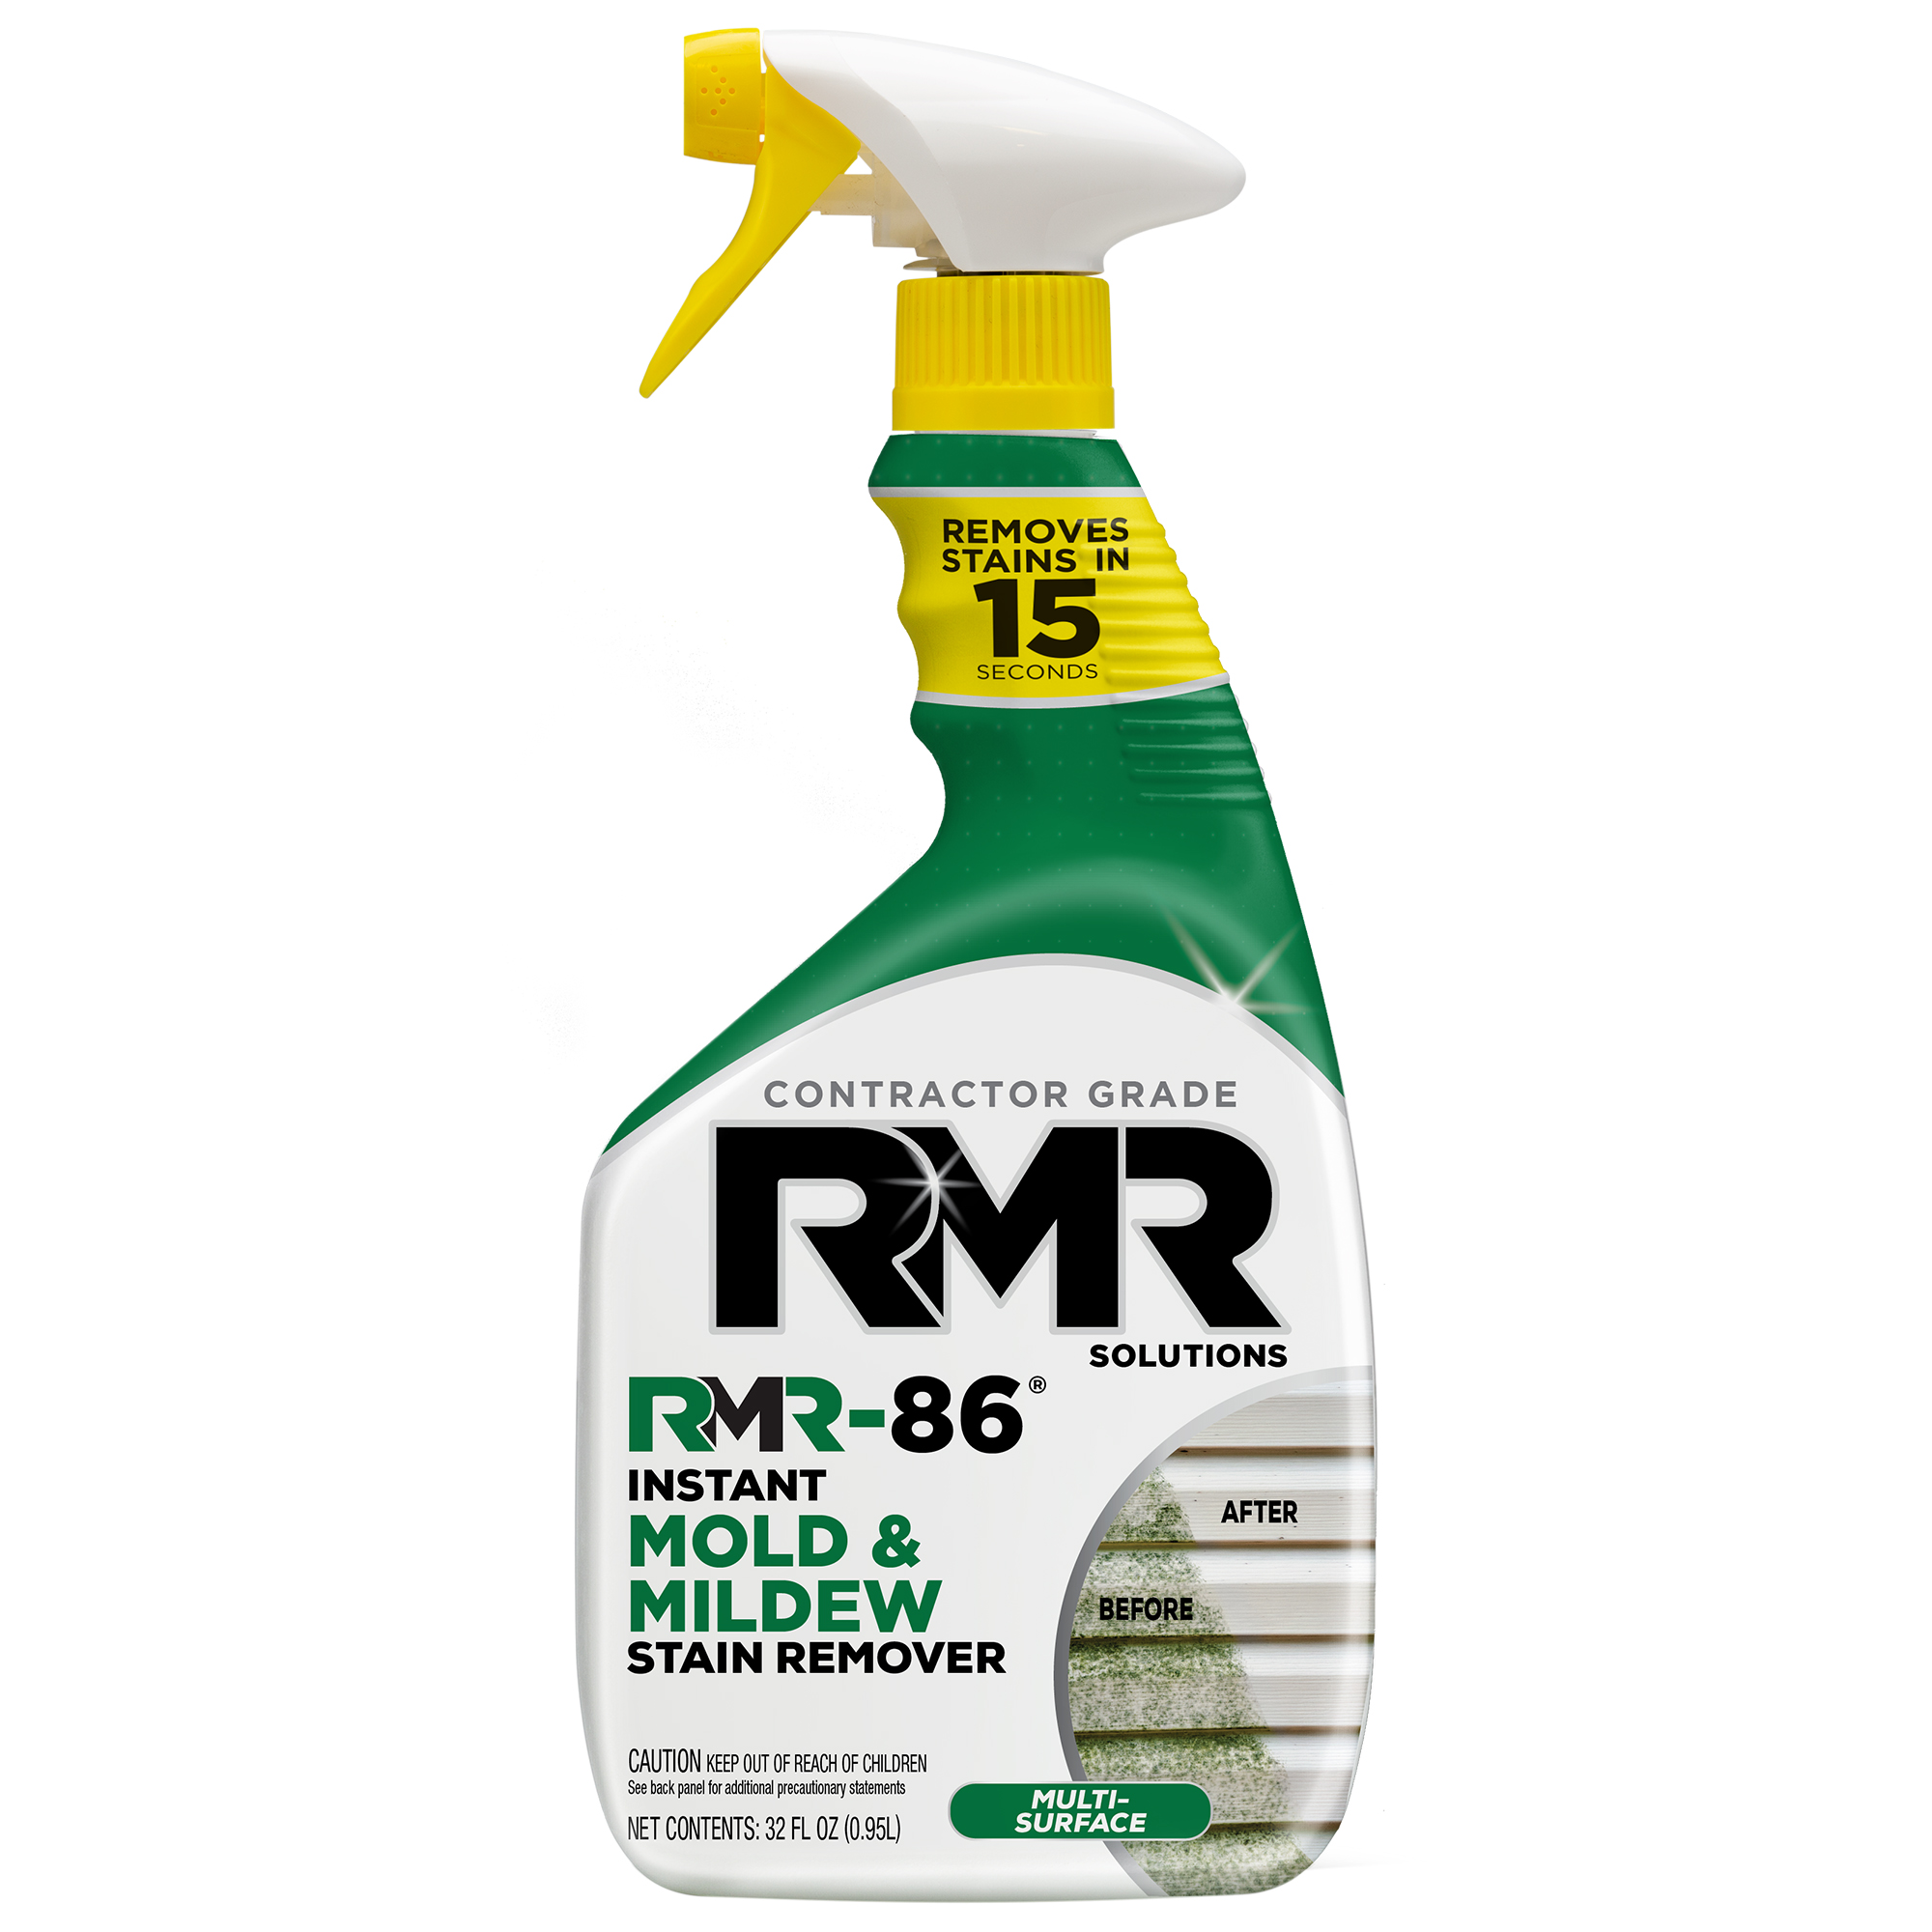 RMR-86 Instant Mold and Mildew Stain Remover, 32 Fl Oz - image 1 of 8